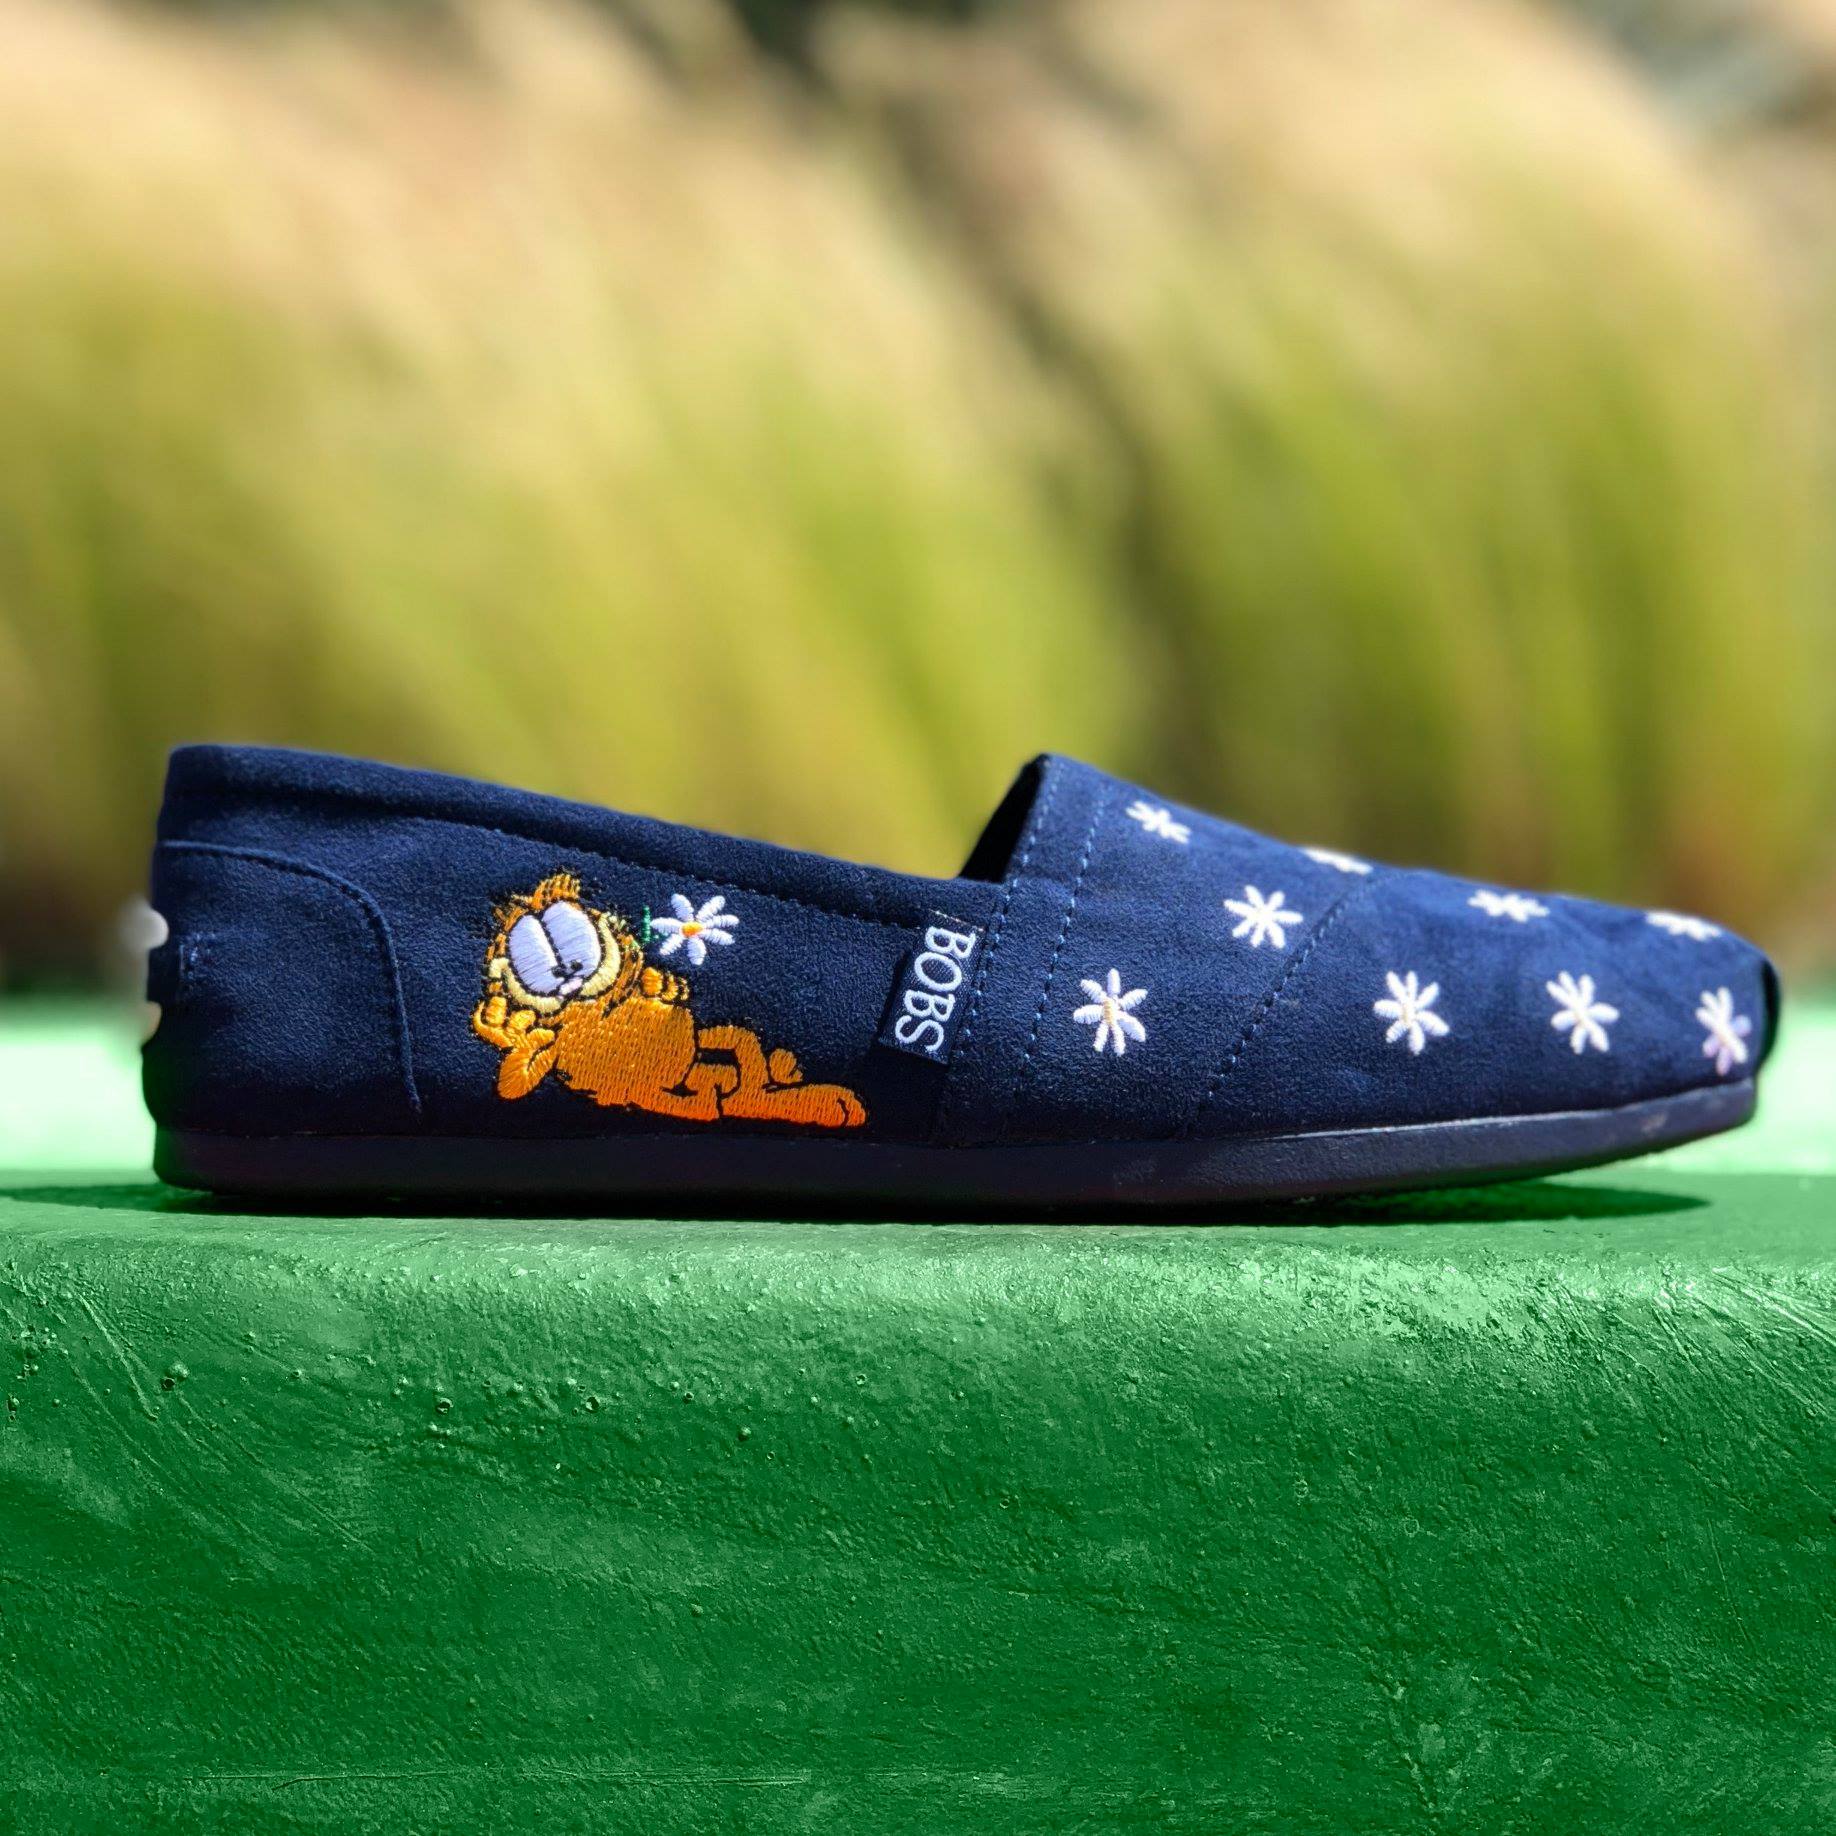 Skechers launches Garfield collection 